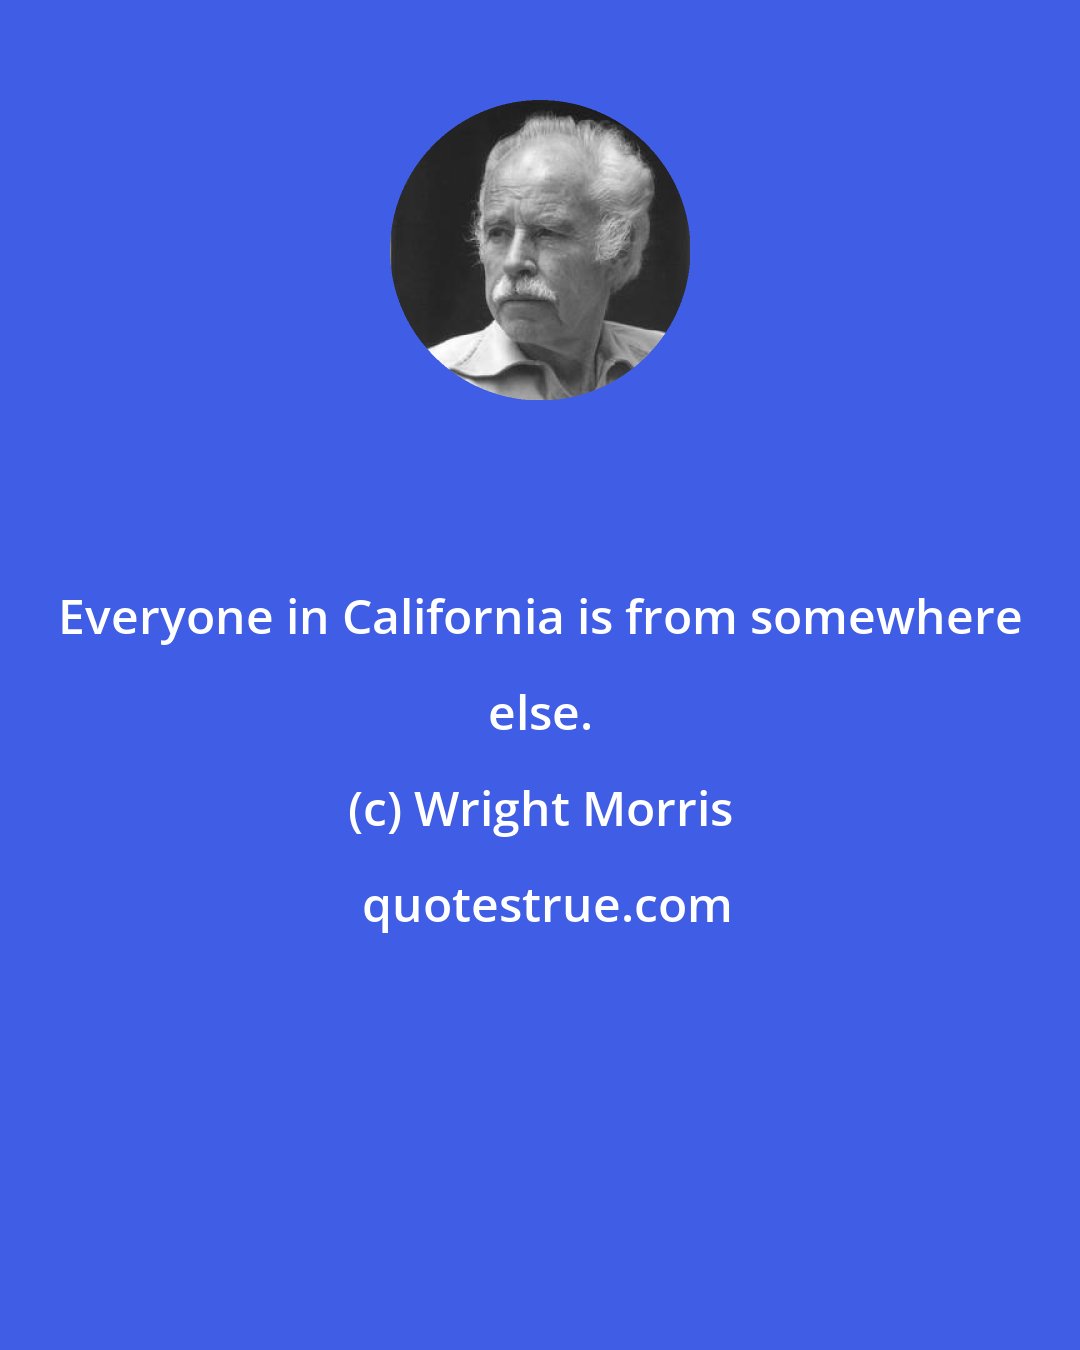 Wright Morris: Everyone in California is from somewhere else.